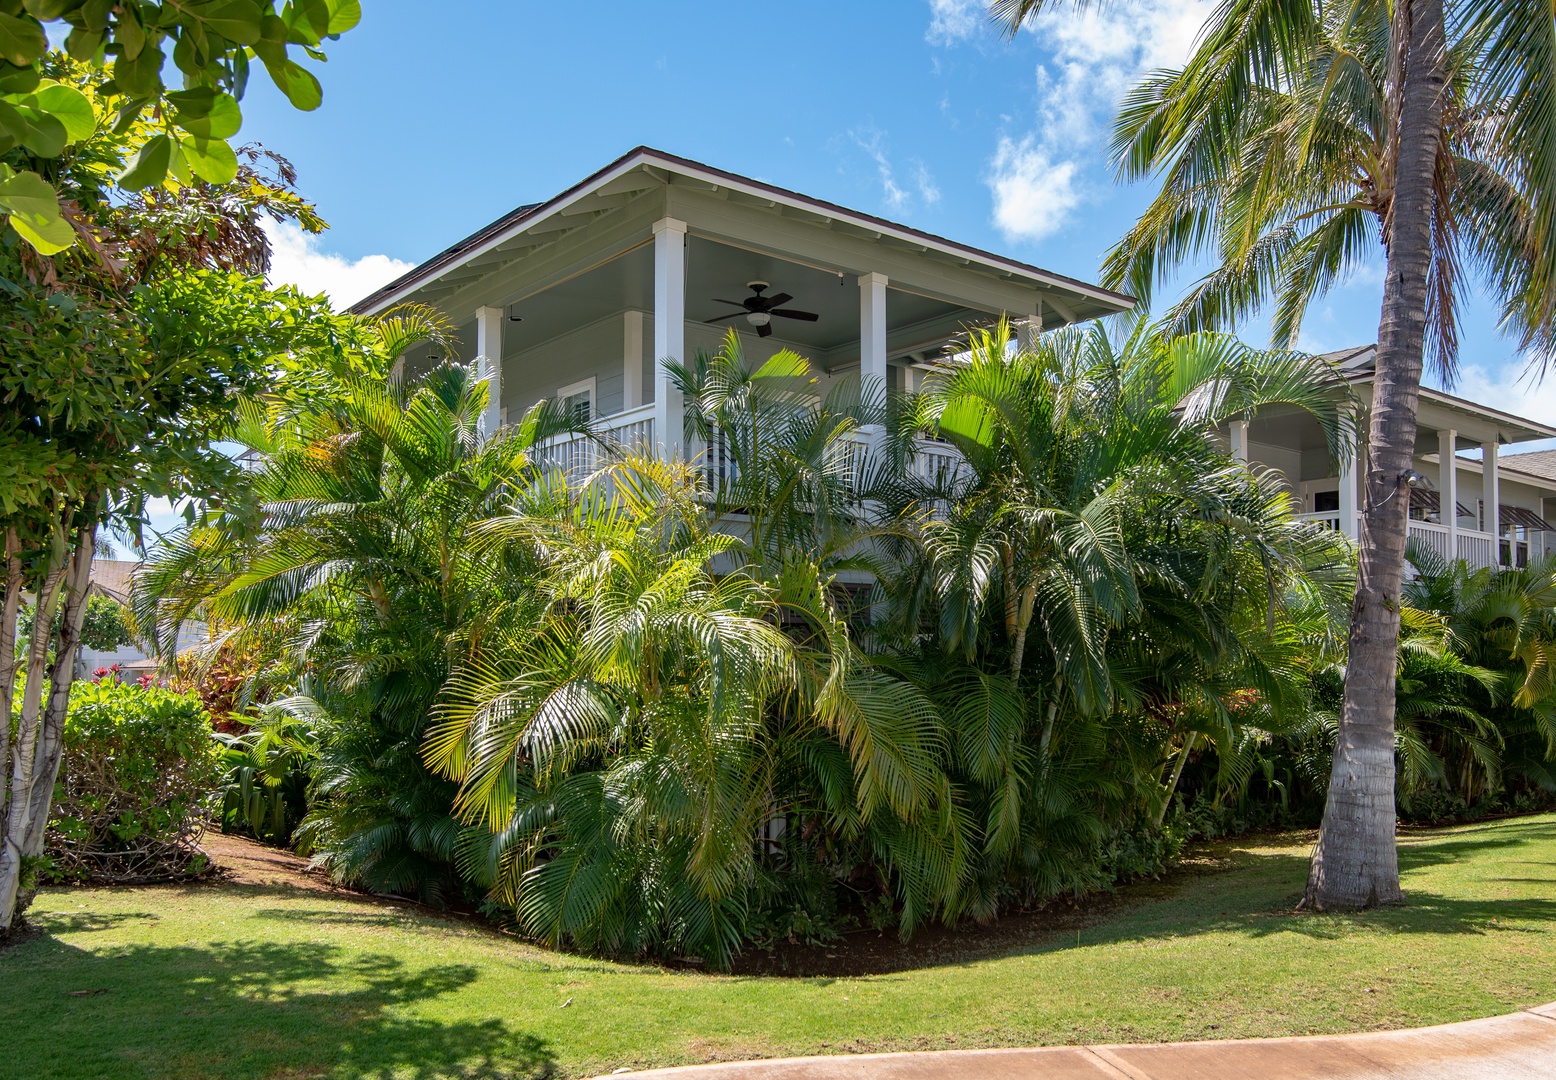 Kapolei Vacation Rentals, Coconut Plantation 1200-4 - The tropical landscaping is an island delight.